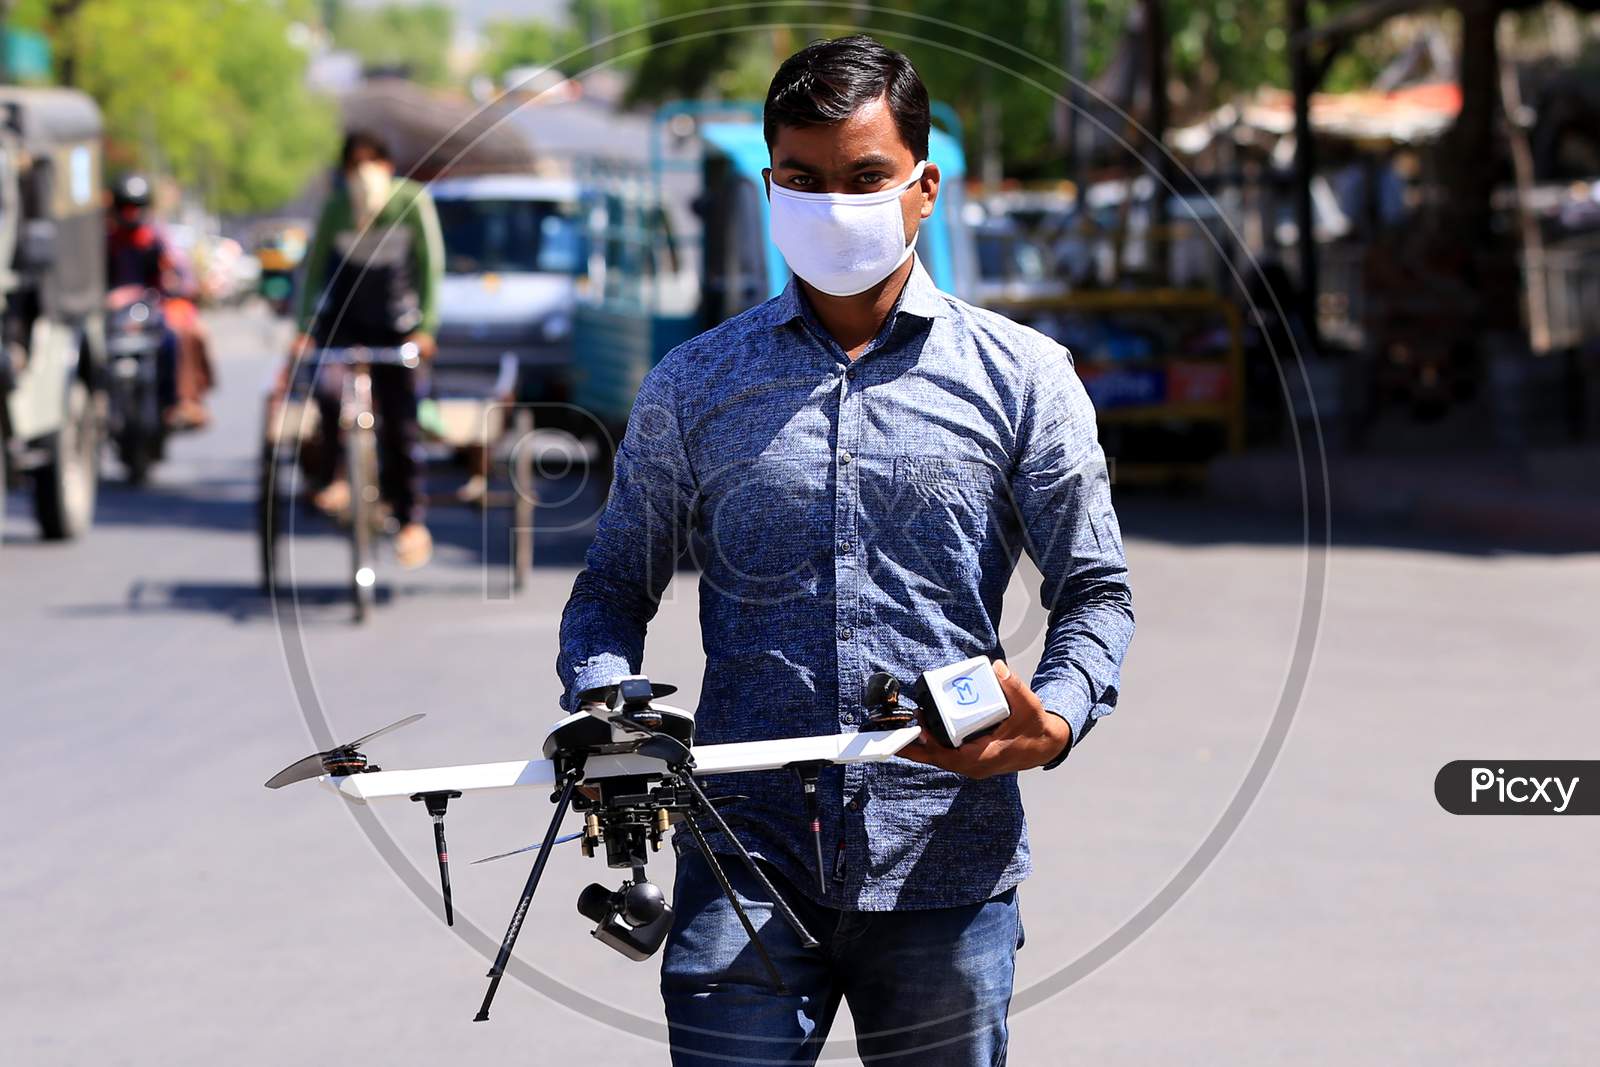 A man holds a drone operated by a security personnel for surveilling a hotspot area during a government-imposed nationwide lockdown as a preventive measure against the COVID-19 or coronavirus, in Ajmer, Rajasthan, India on 06 May 2020.